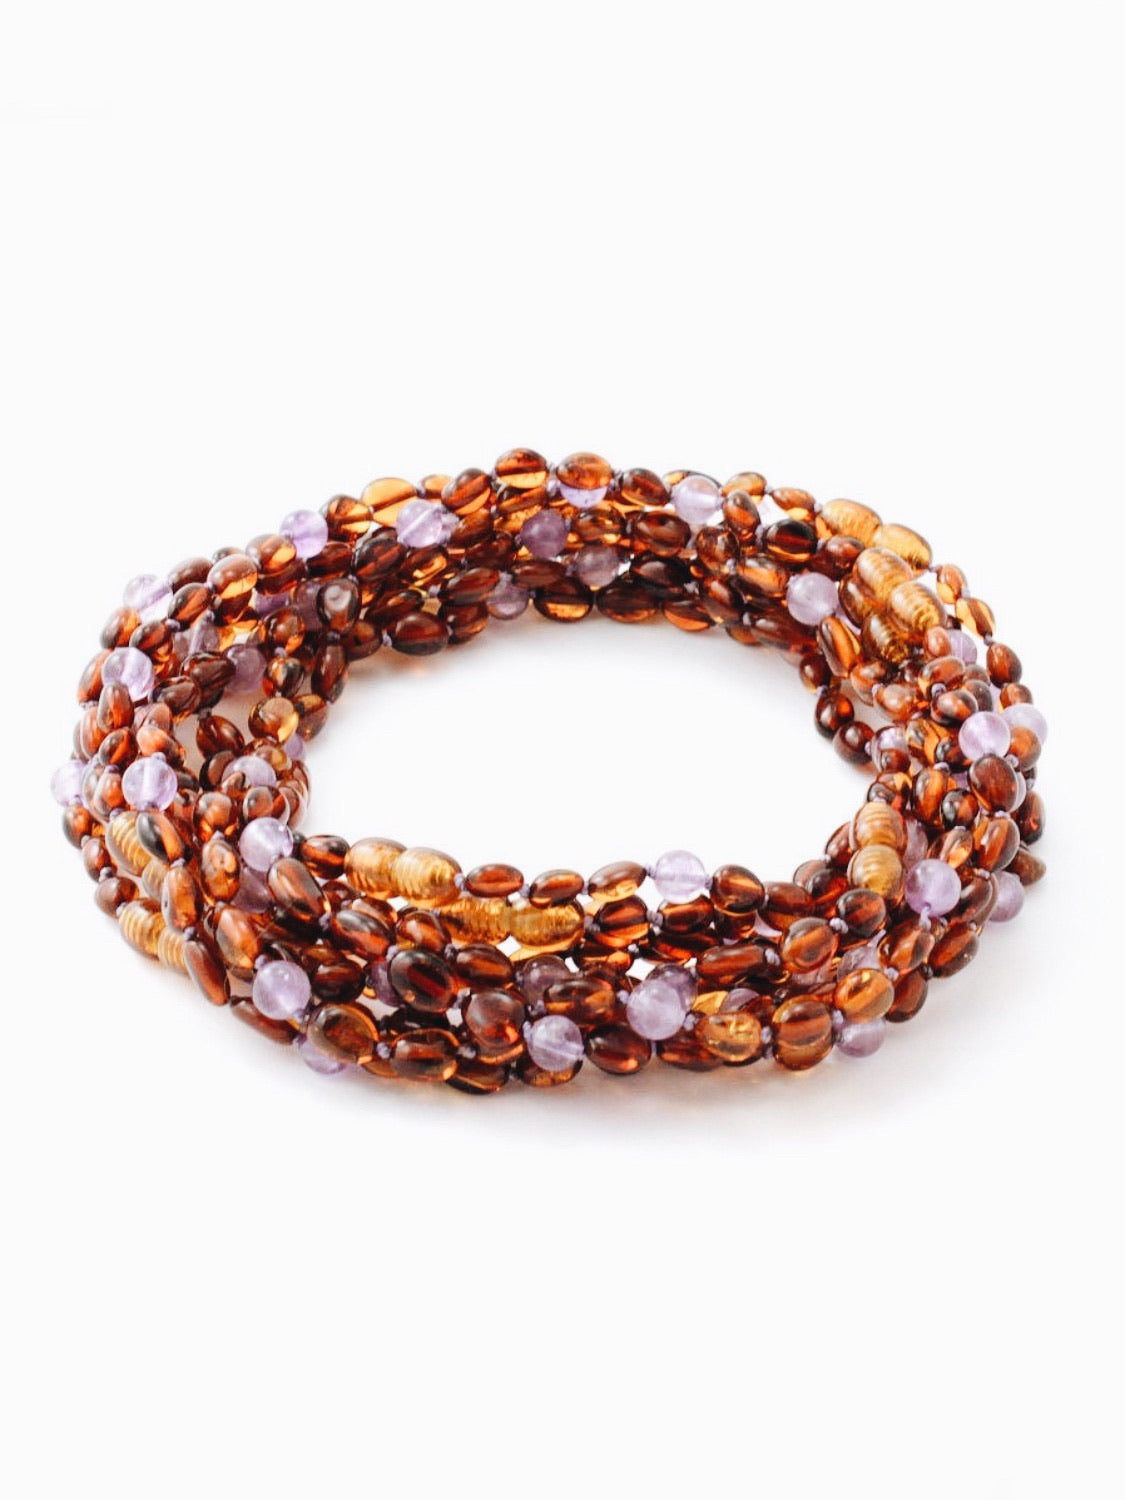 AMBER NECKLACE - AMETHYST